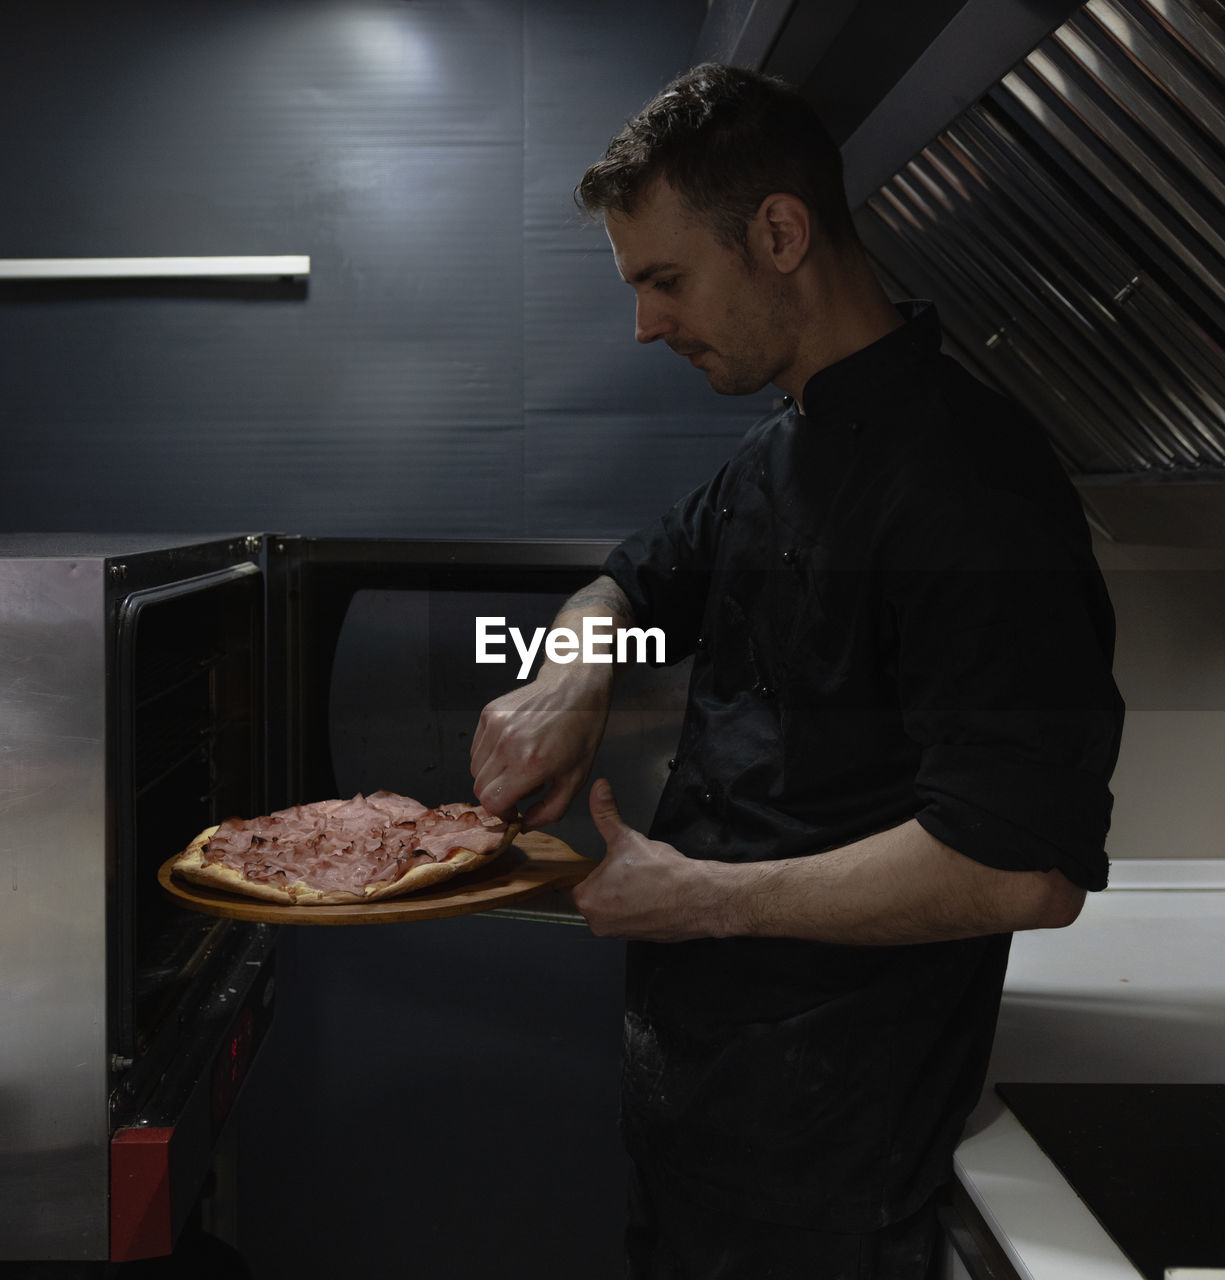 Chef takes the hot pizza out of the oven freshly baked